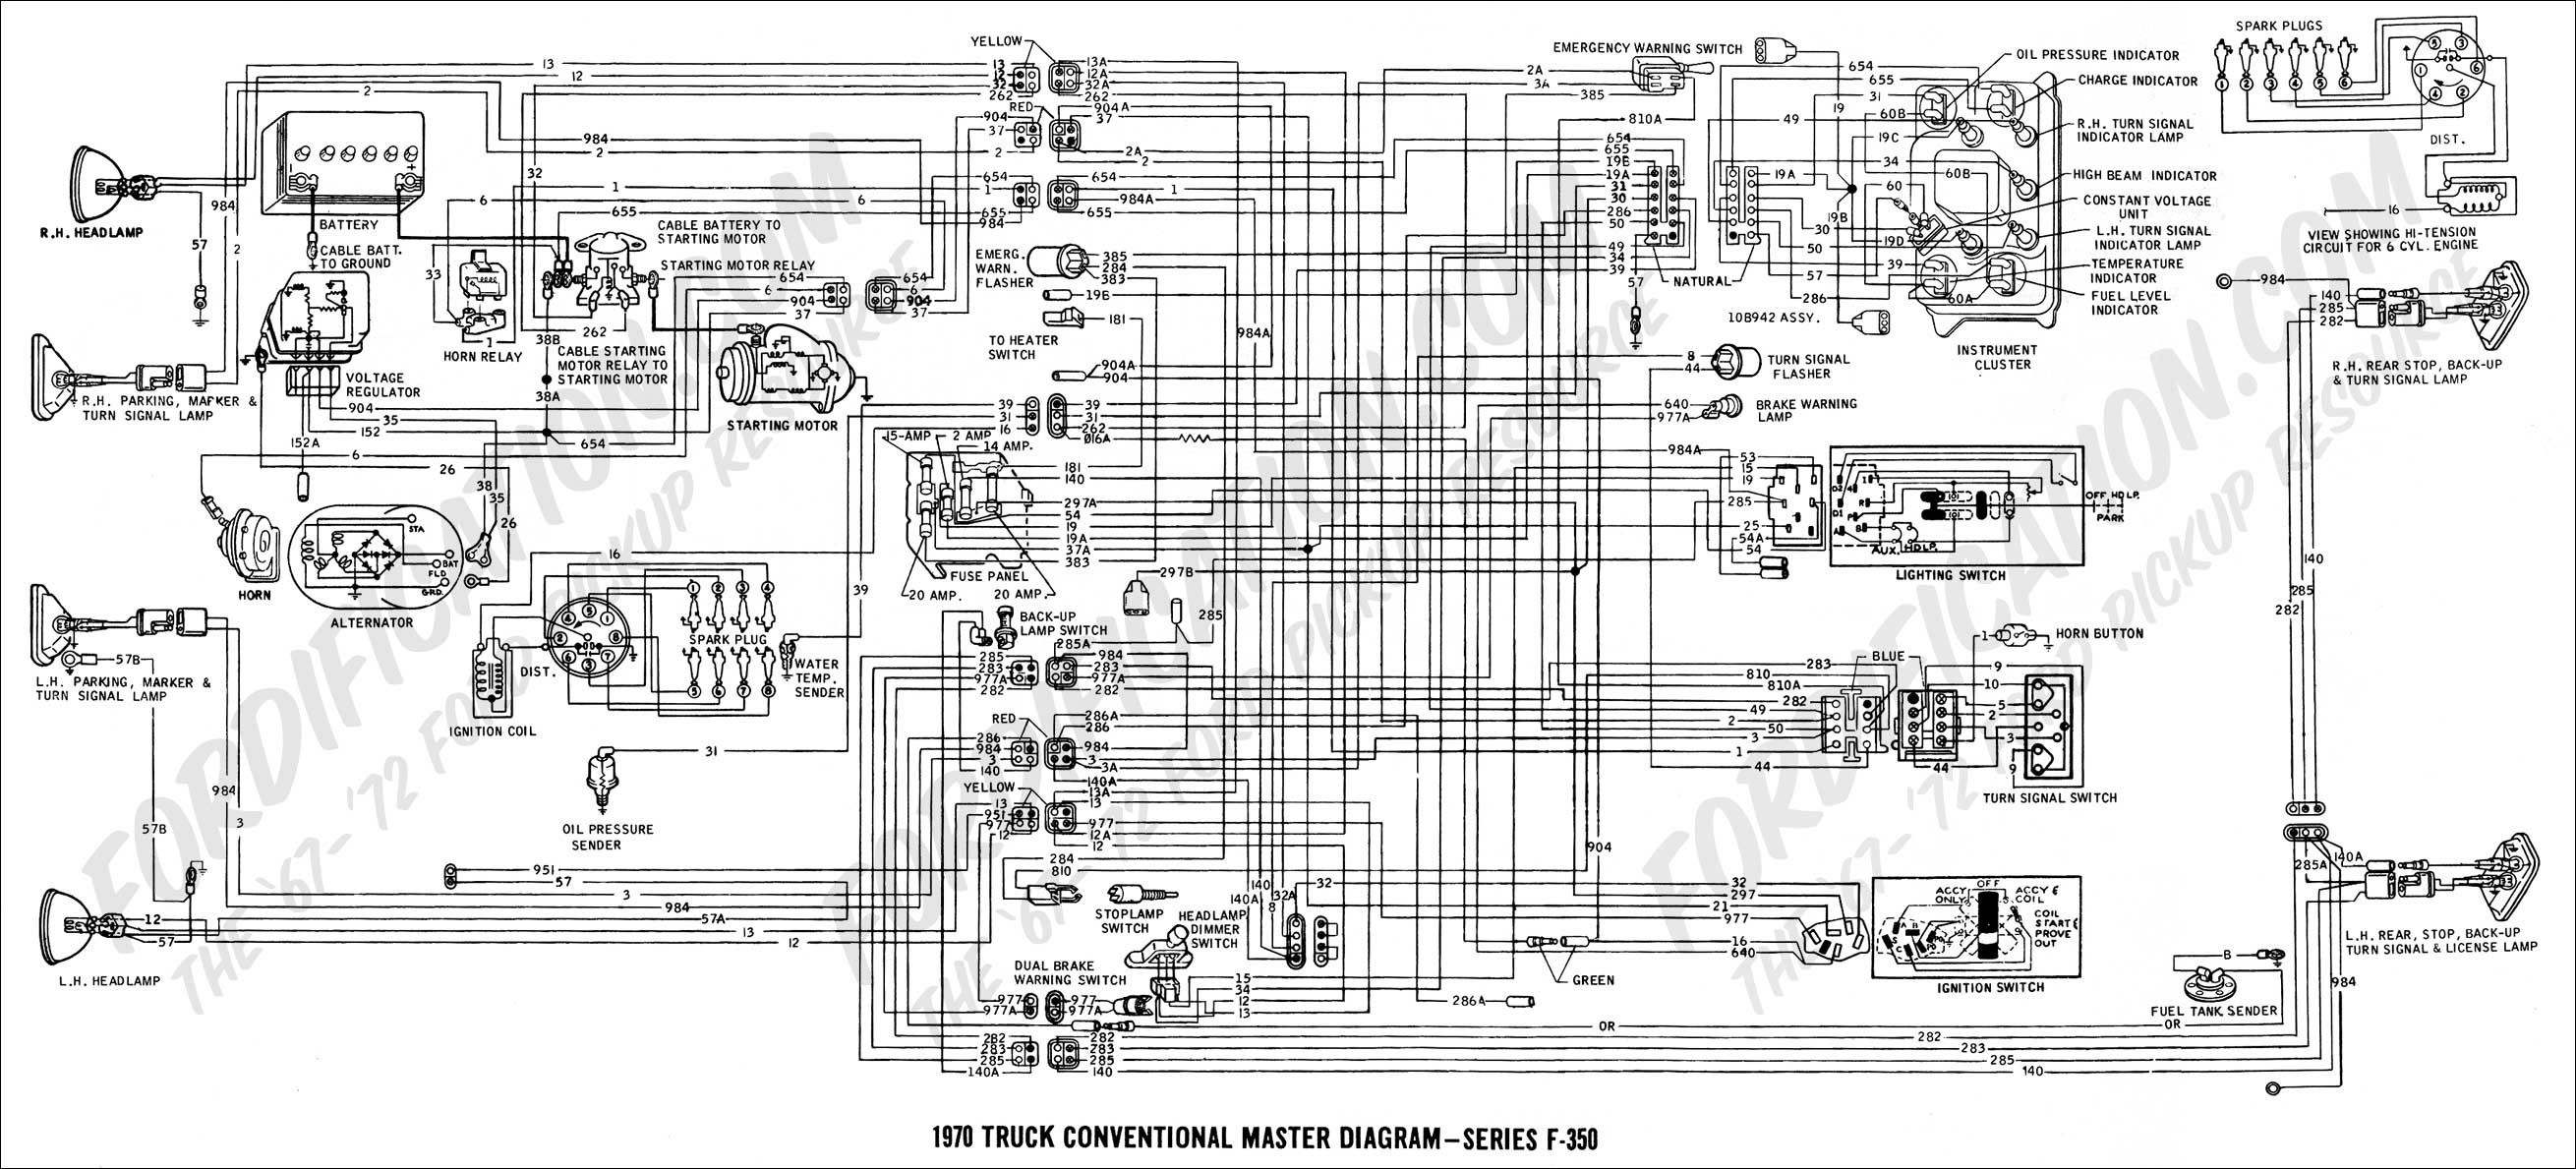 1997 ford F150 4 6 Engine Diagram ford Ranger Parts Diagram Of 1997 ford F150 4 6 Engine Diagram